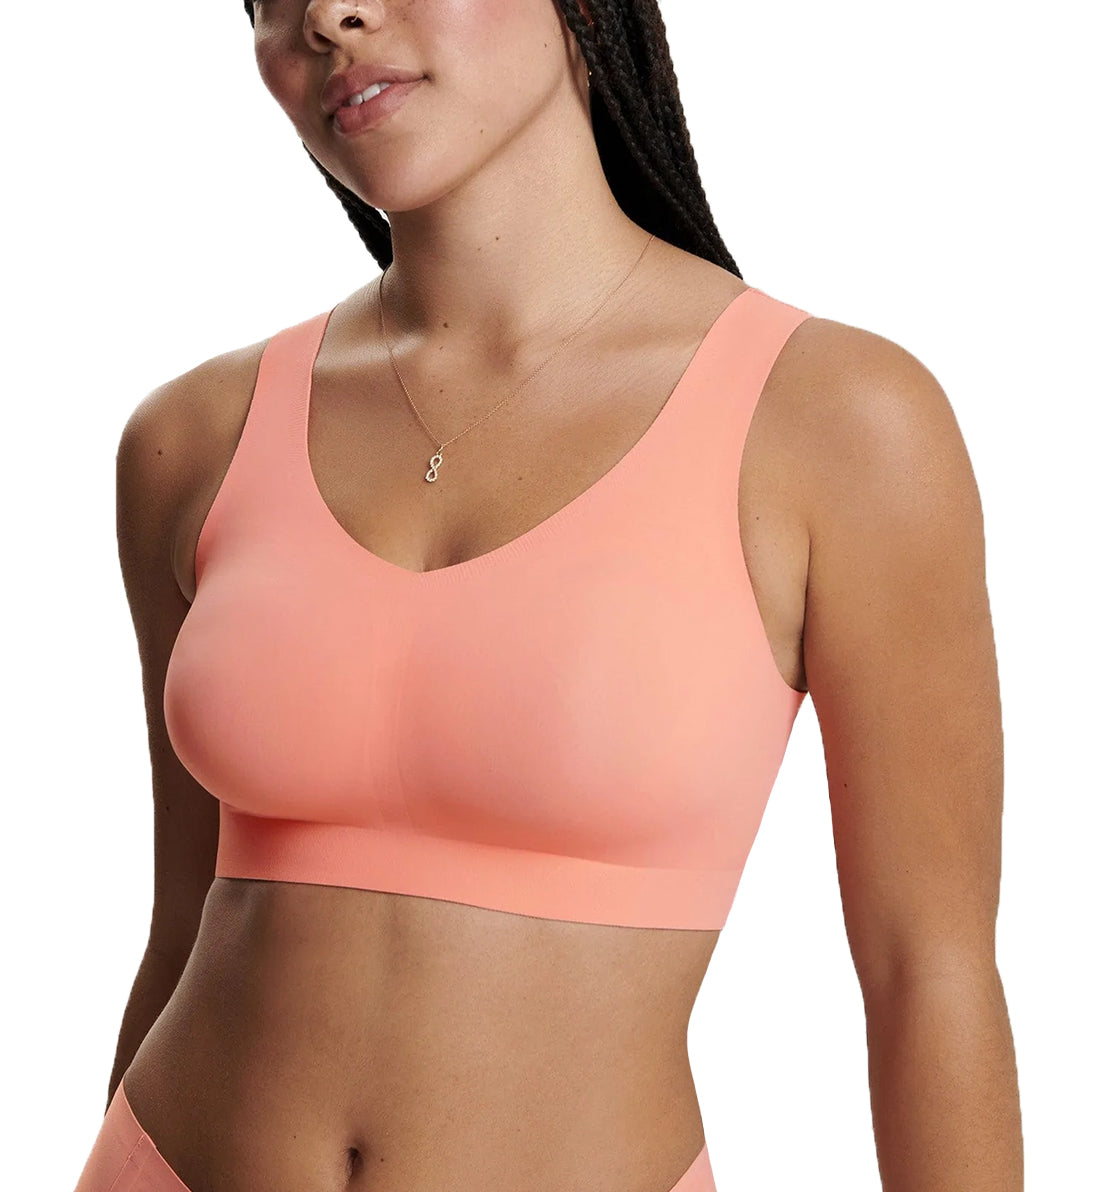 Evelyn & Bobbie DEFY V-Neck Bralette w/ Removable Pads (1728),Small,Coral - Coral,Small